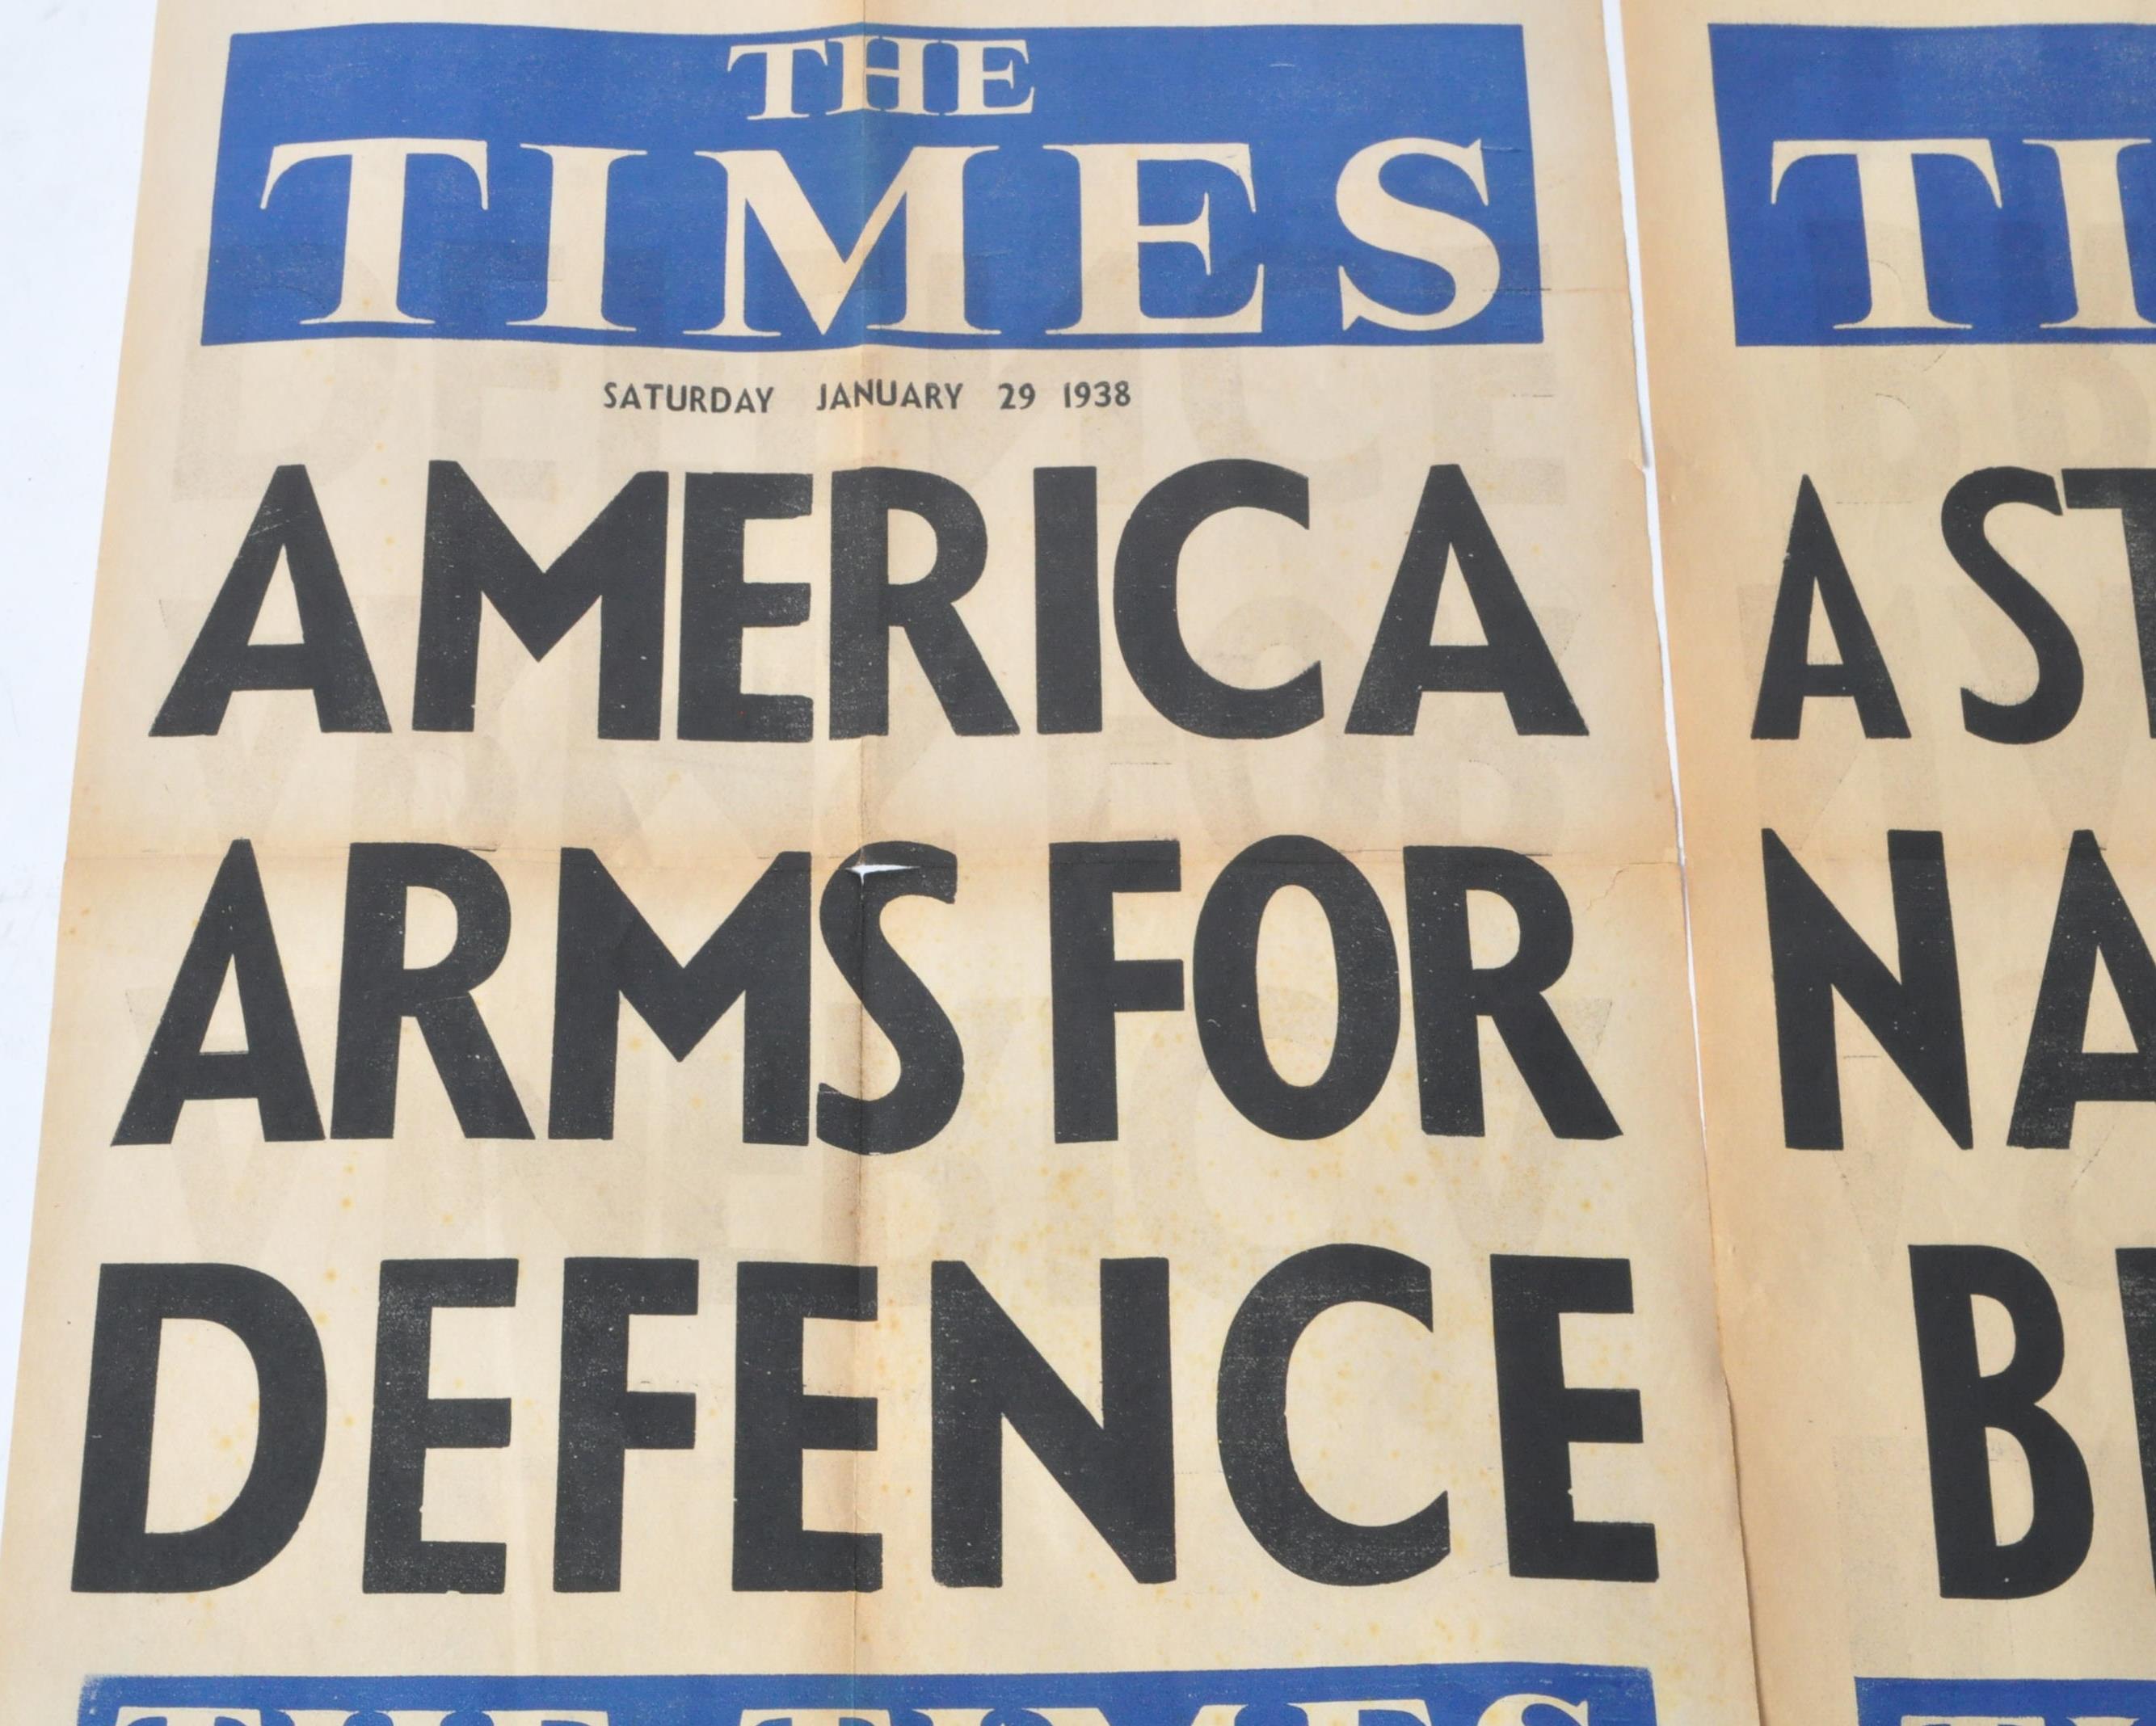 WWII INTEREST - THE TIMES - ORIGINAL NEWSPAPER STAND HEADLINE POSTERS - Image 2 of 3